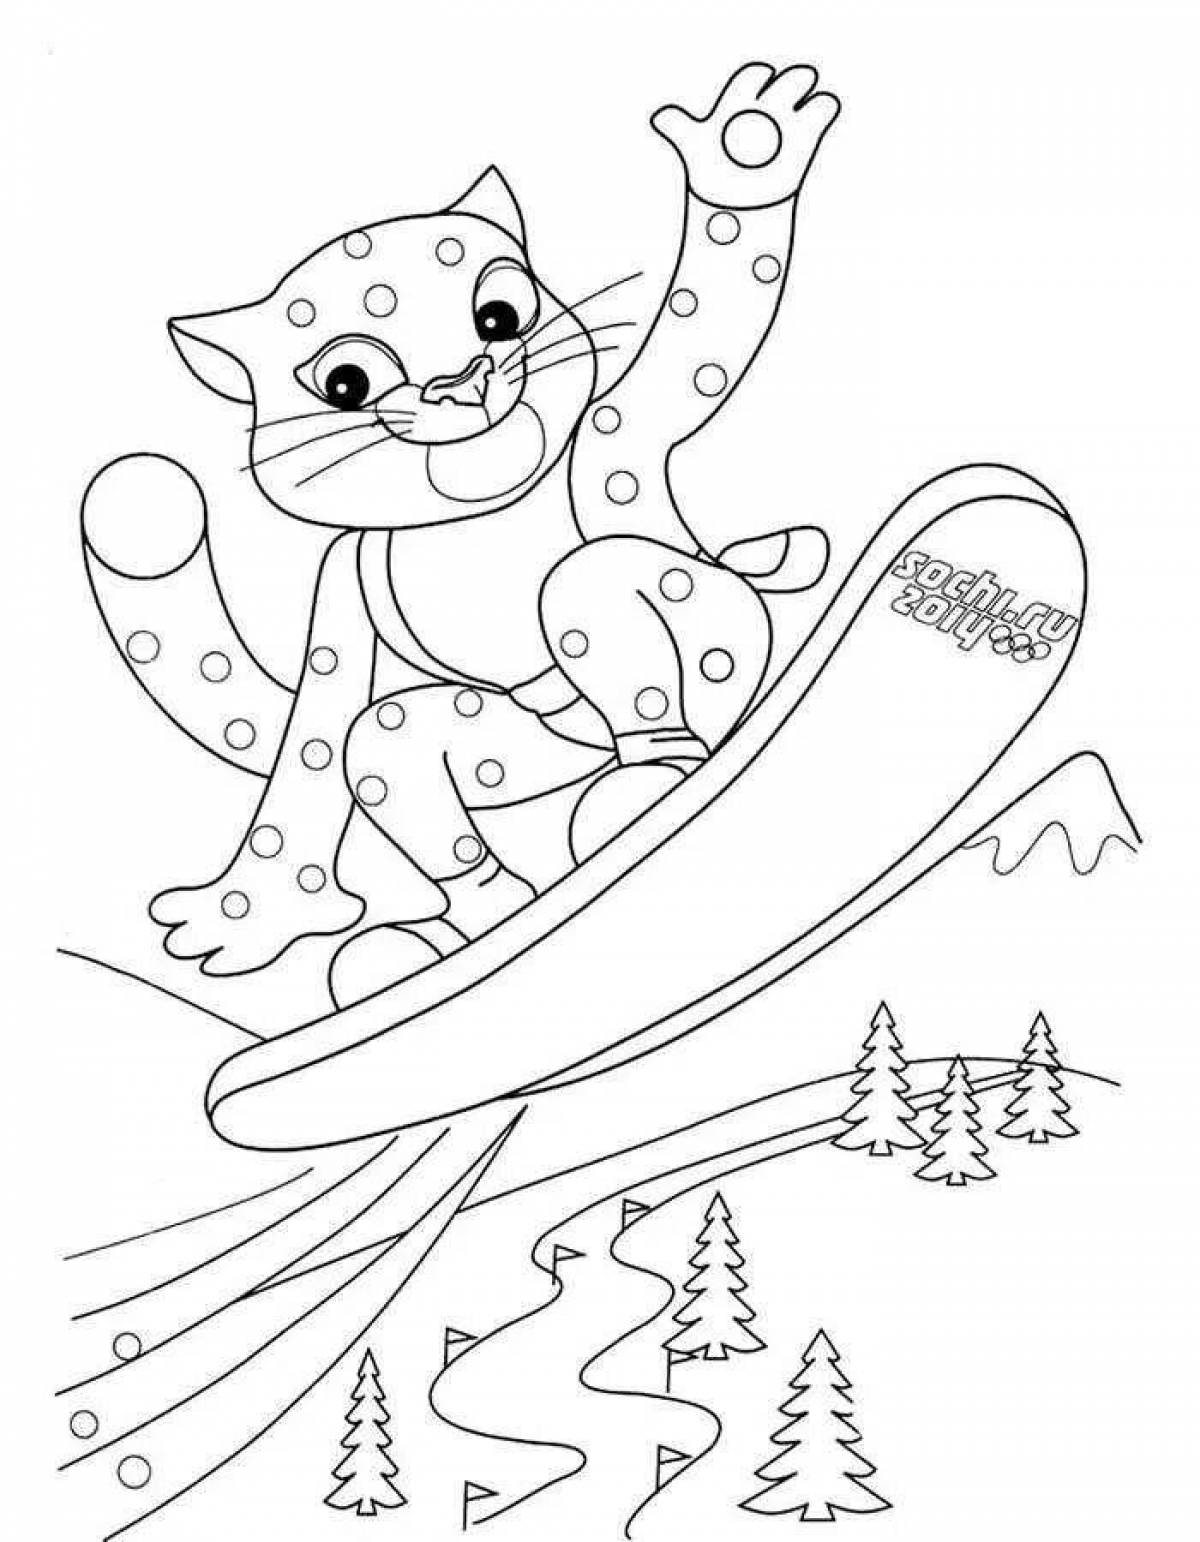 Coloring book winter sports for children 4-5 years old